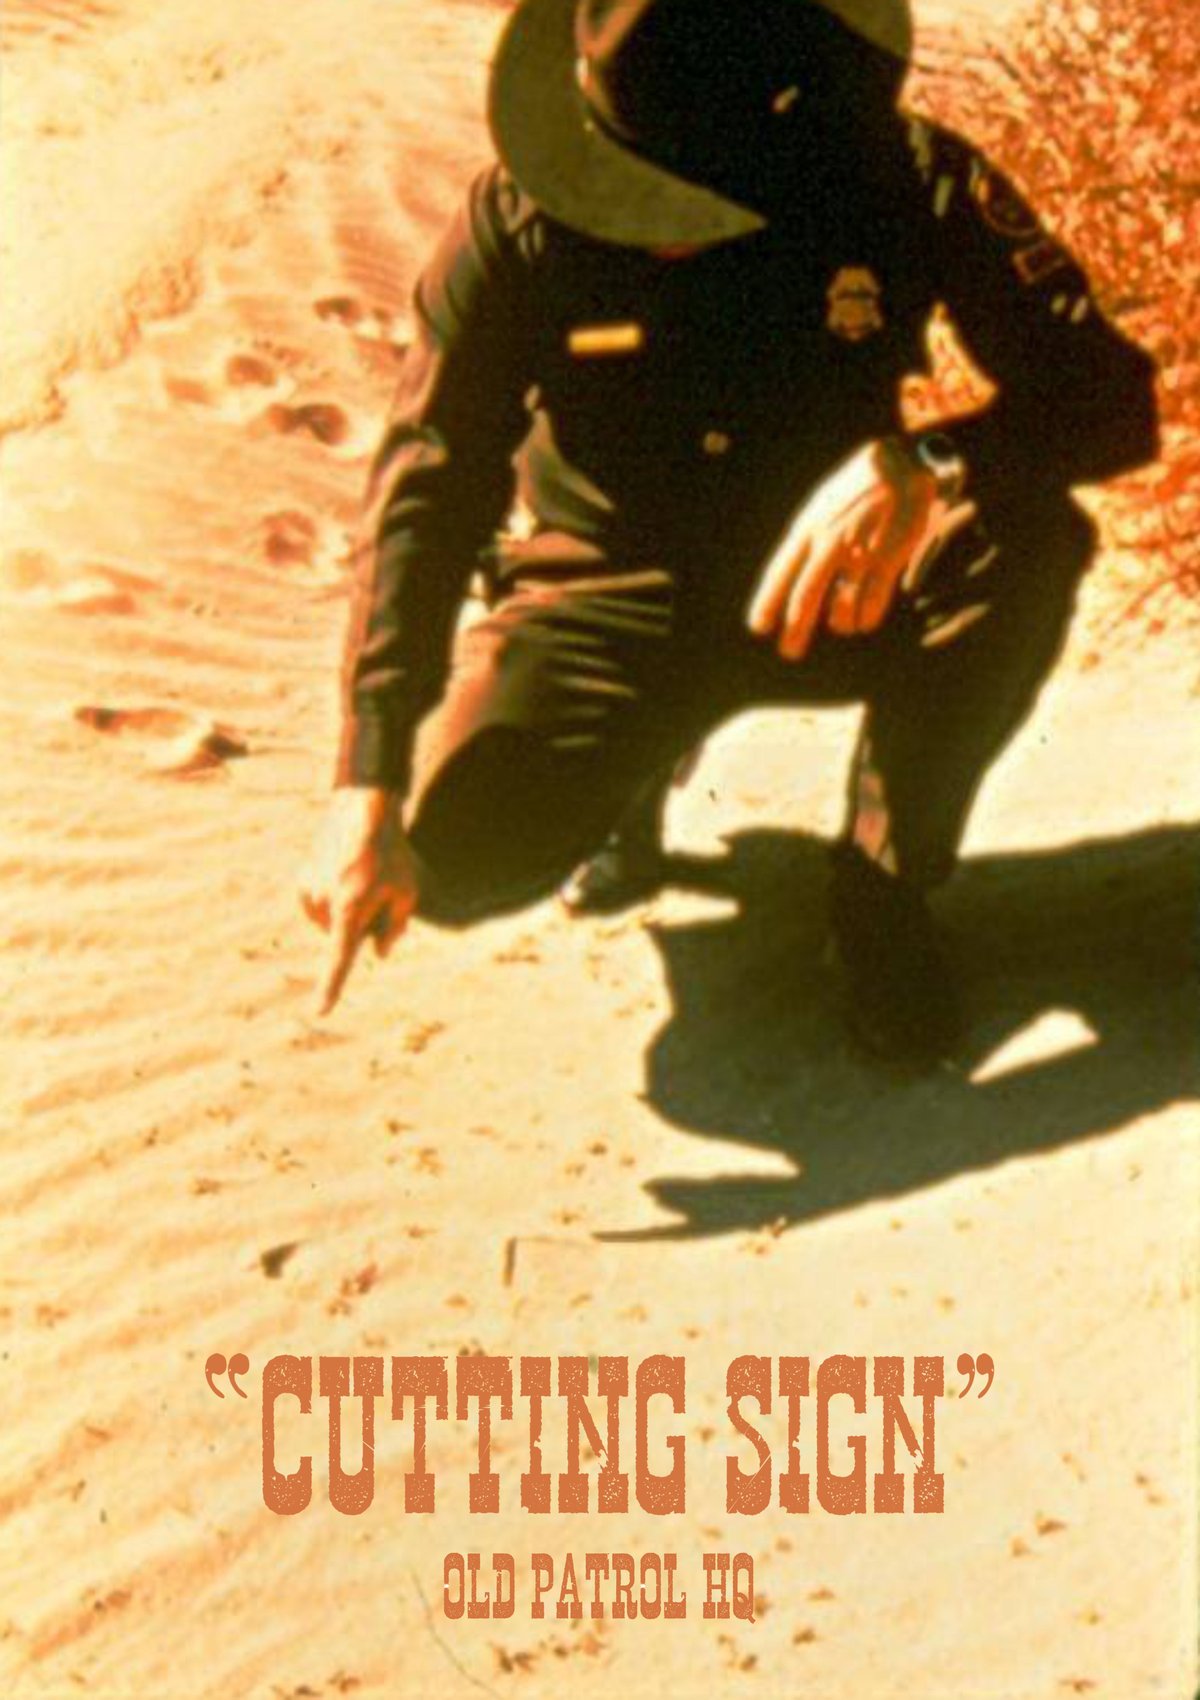 Image of "CUTTING SIGN"